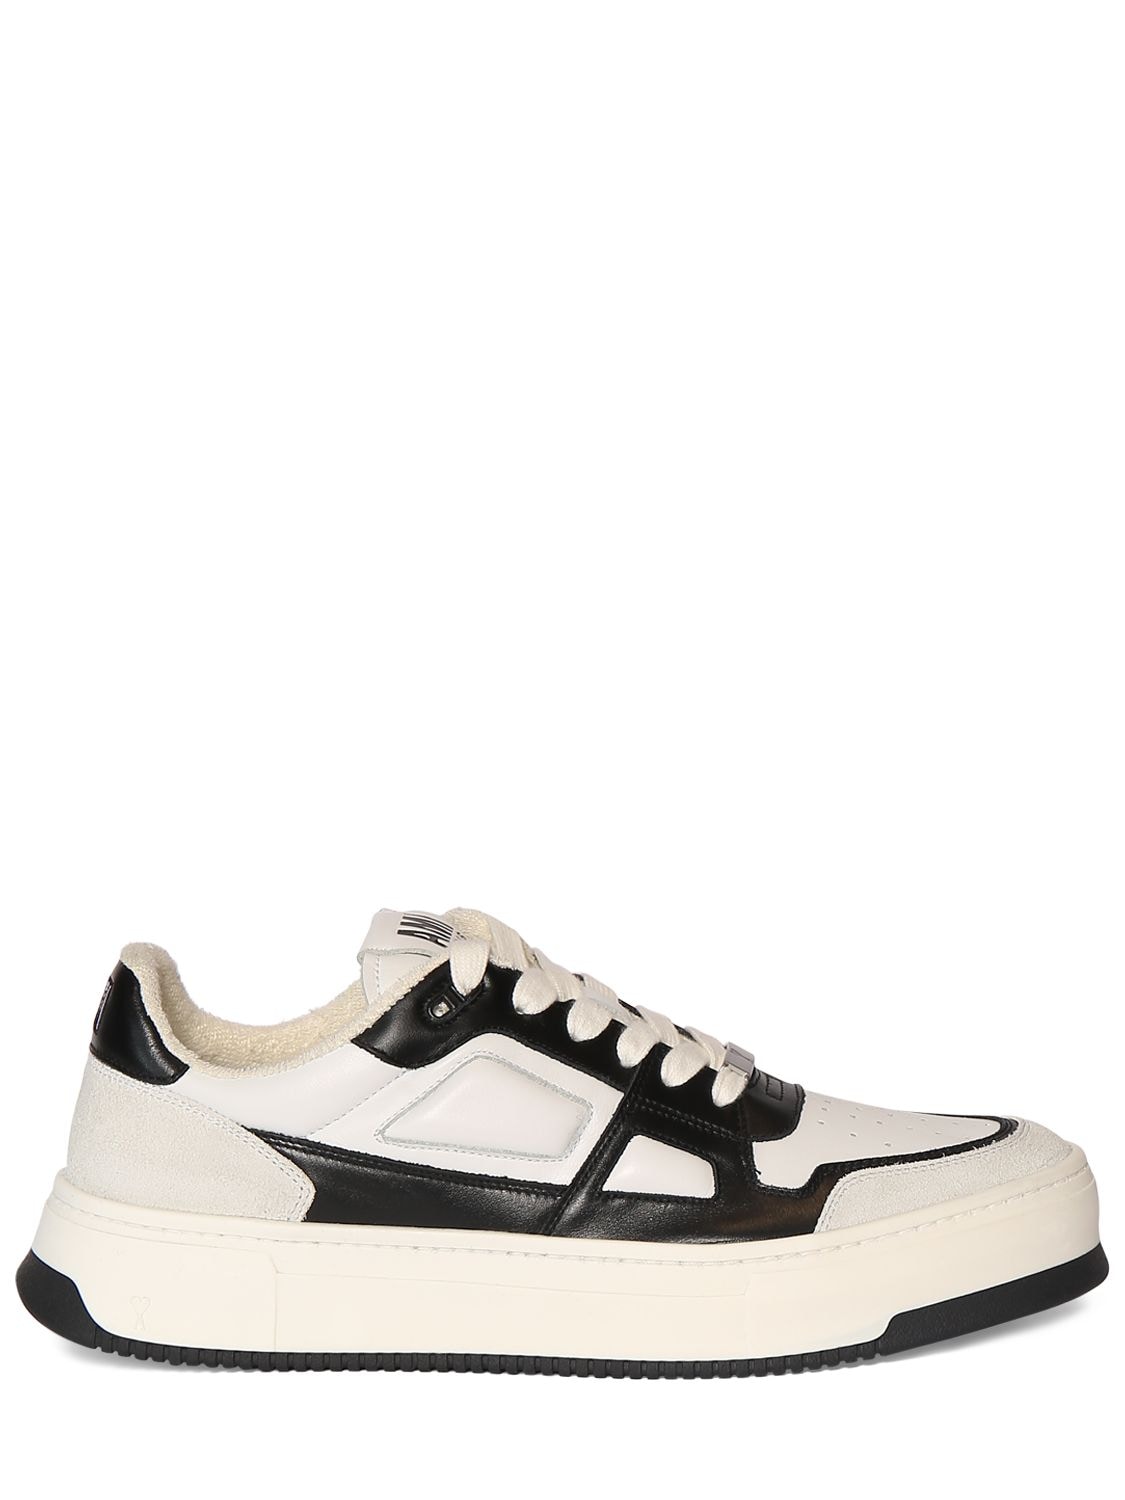 Ami Alexandre Mattiussi New Arcade Leather Low Top Sneakers In White,black